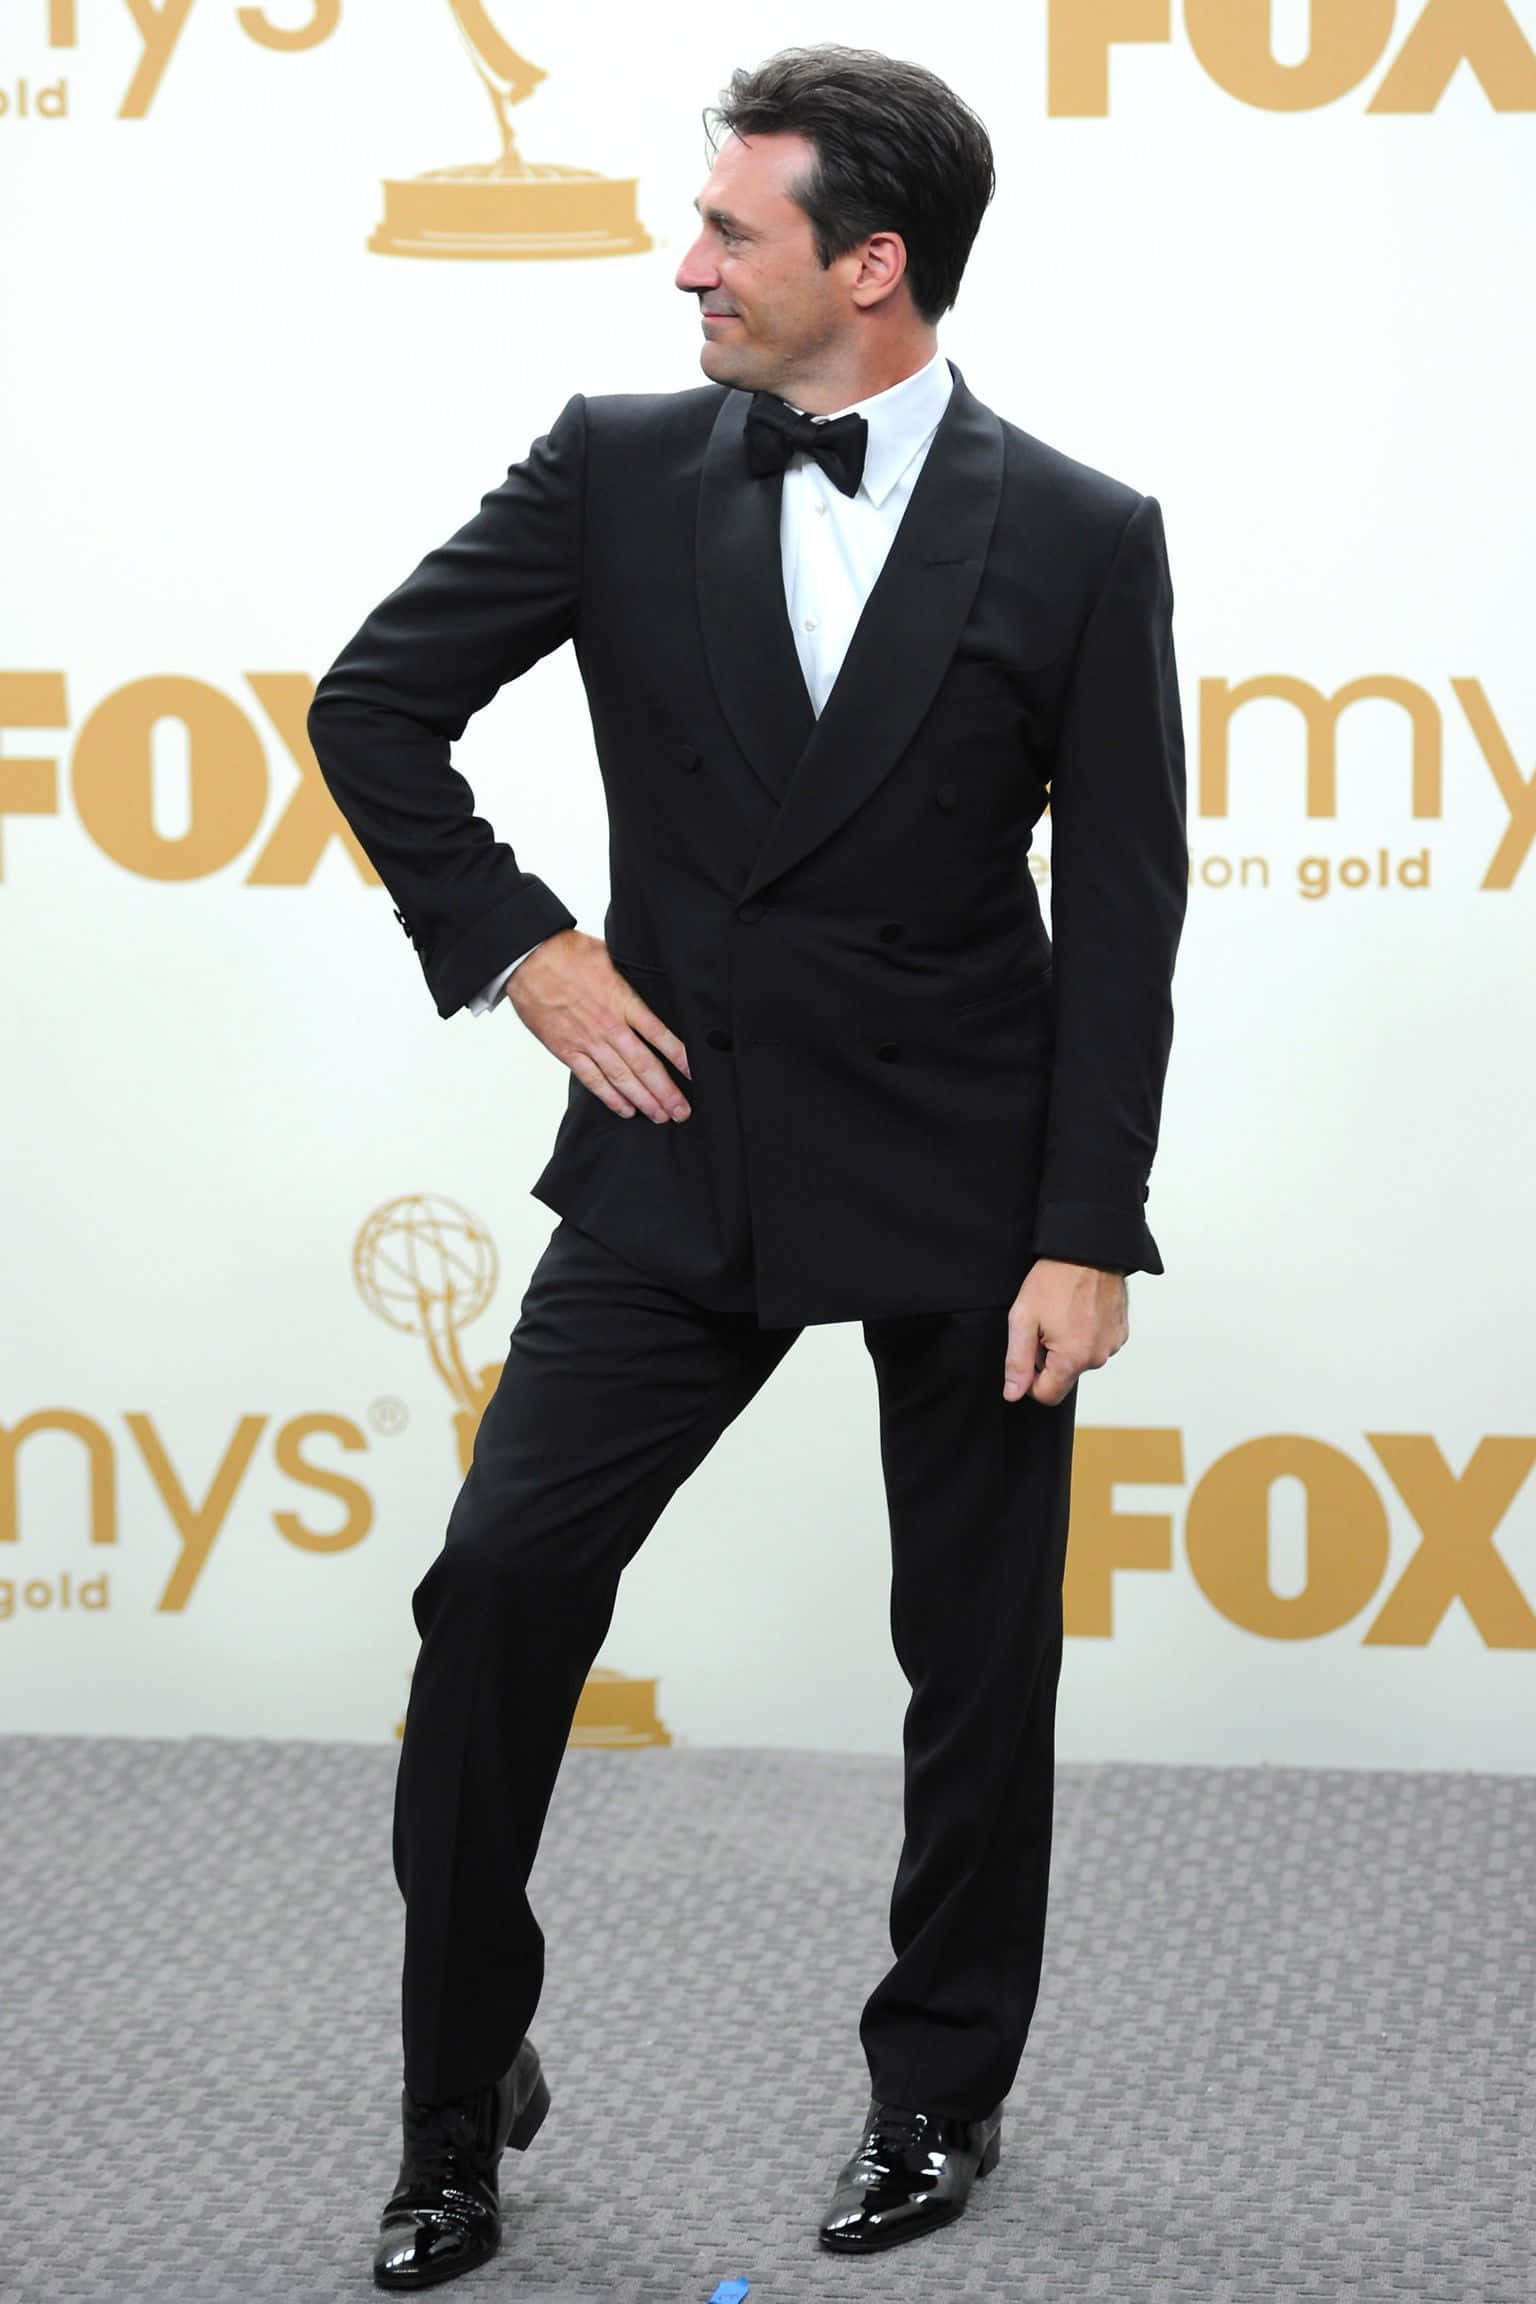 Jon Hamm Radiating Poise in a Classic Suit Wallpaper